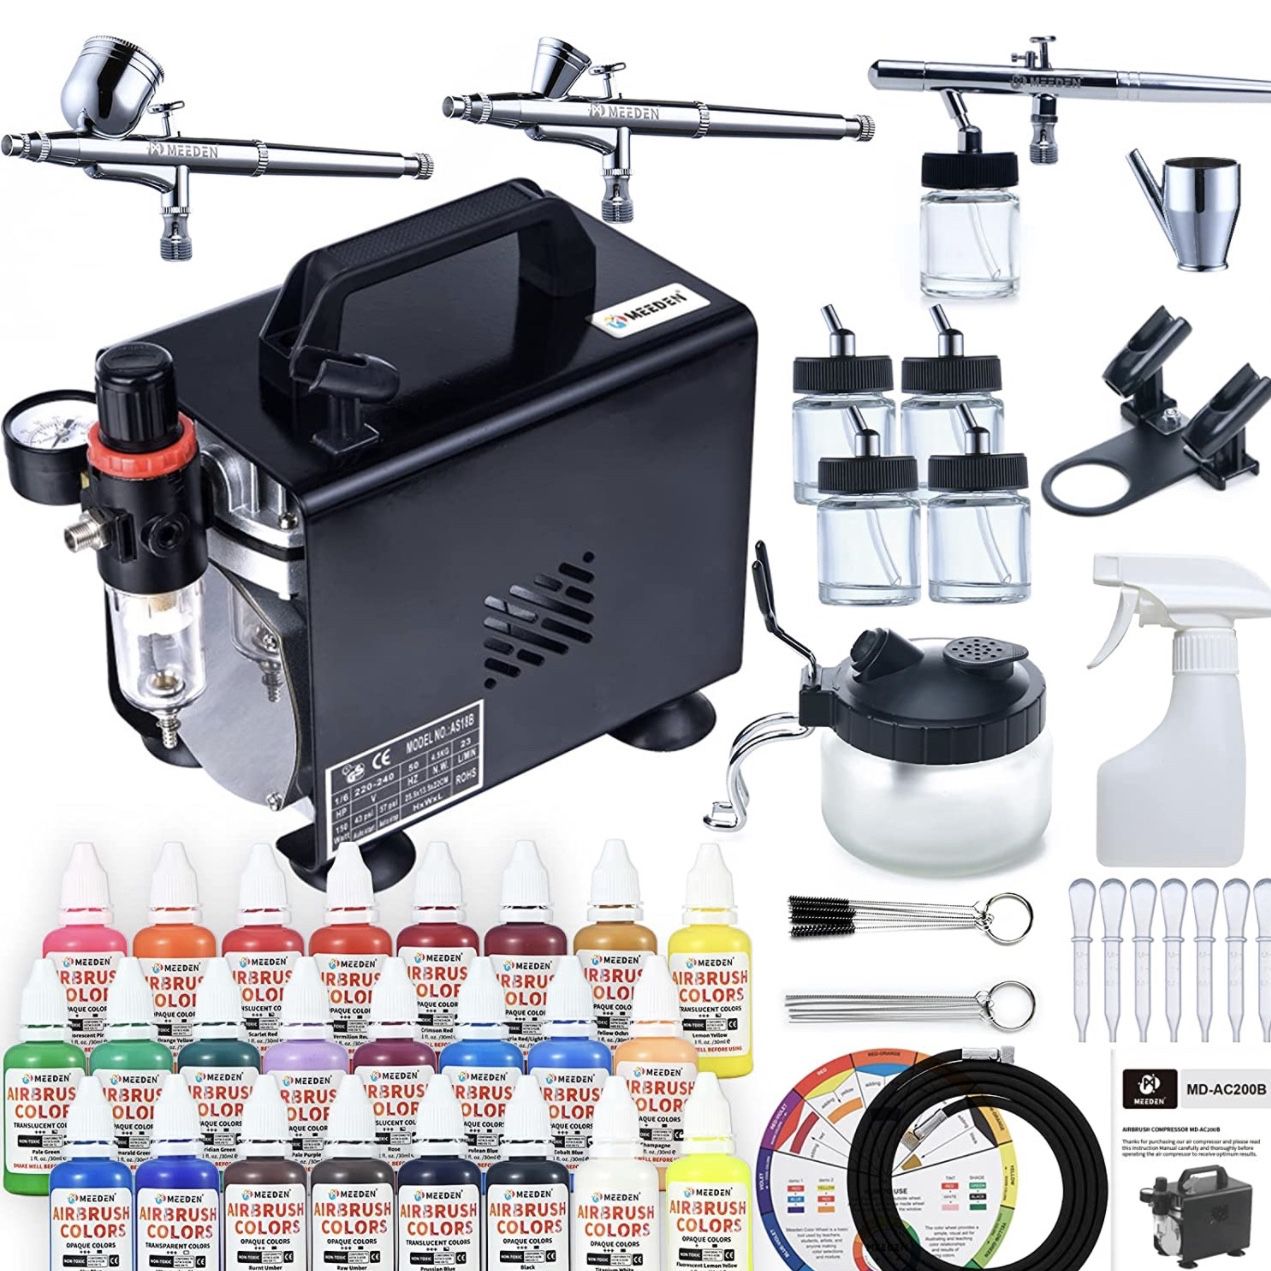 Airbrush Kit with Compressor, 24 Colors - MEEDEN Art